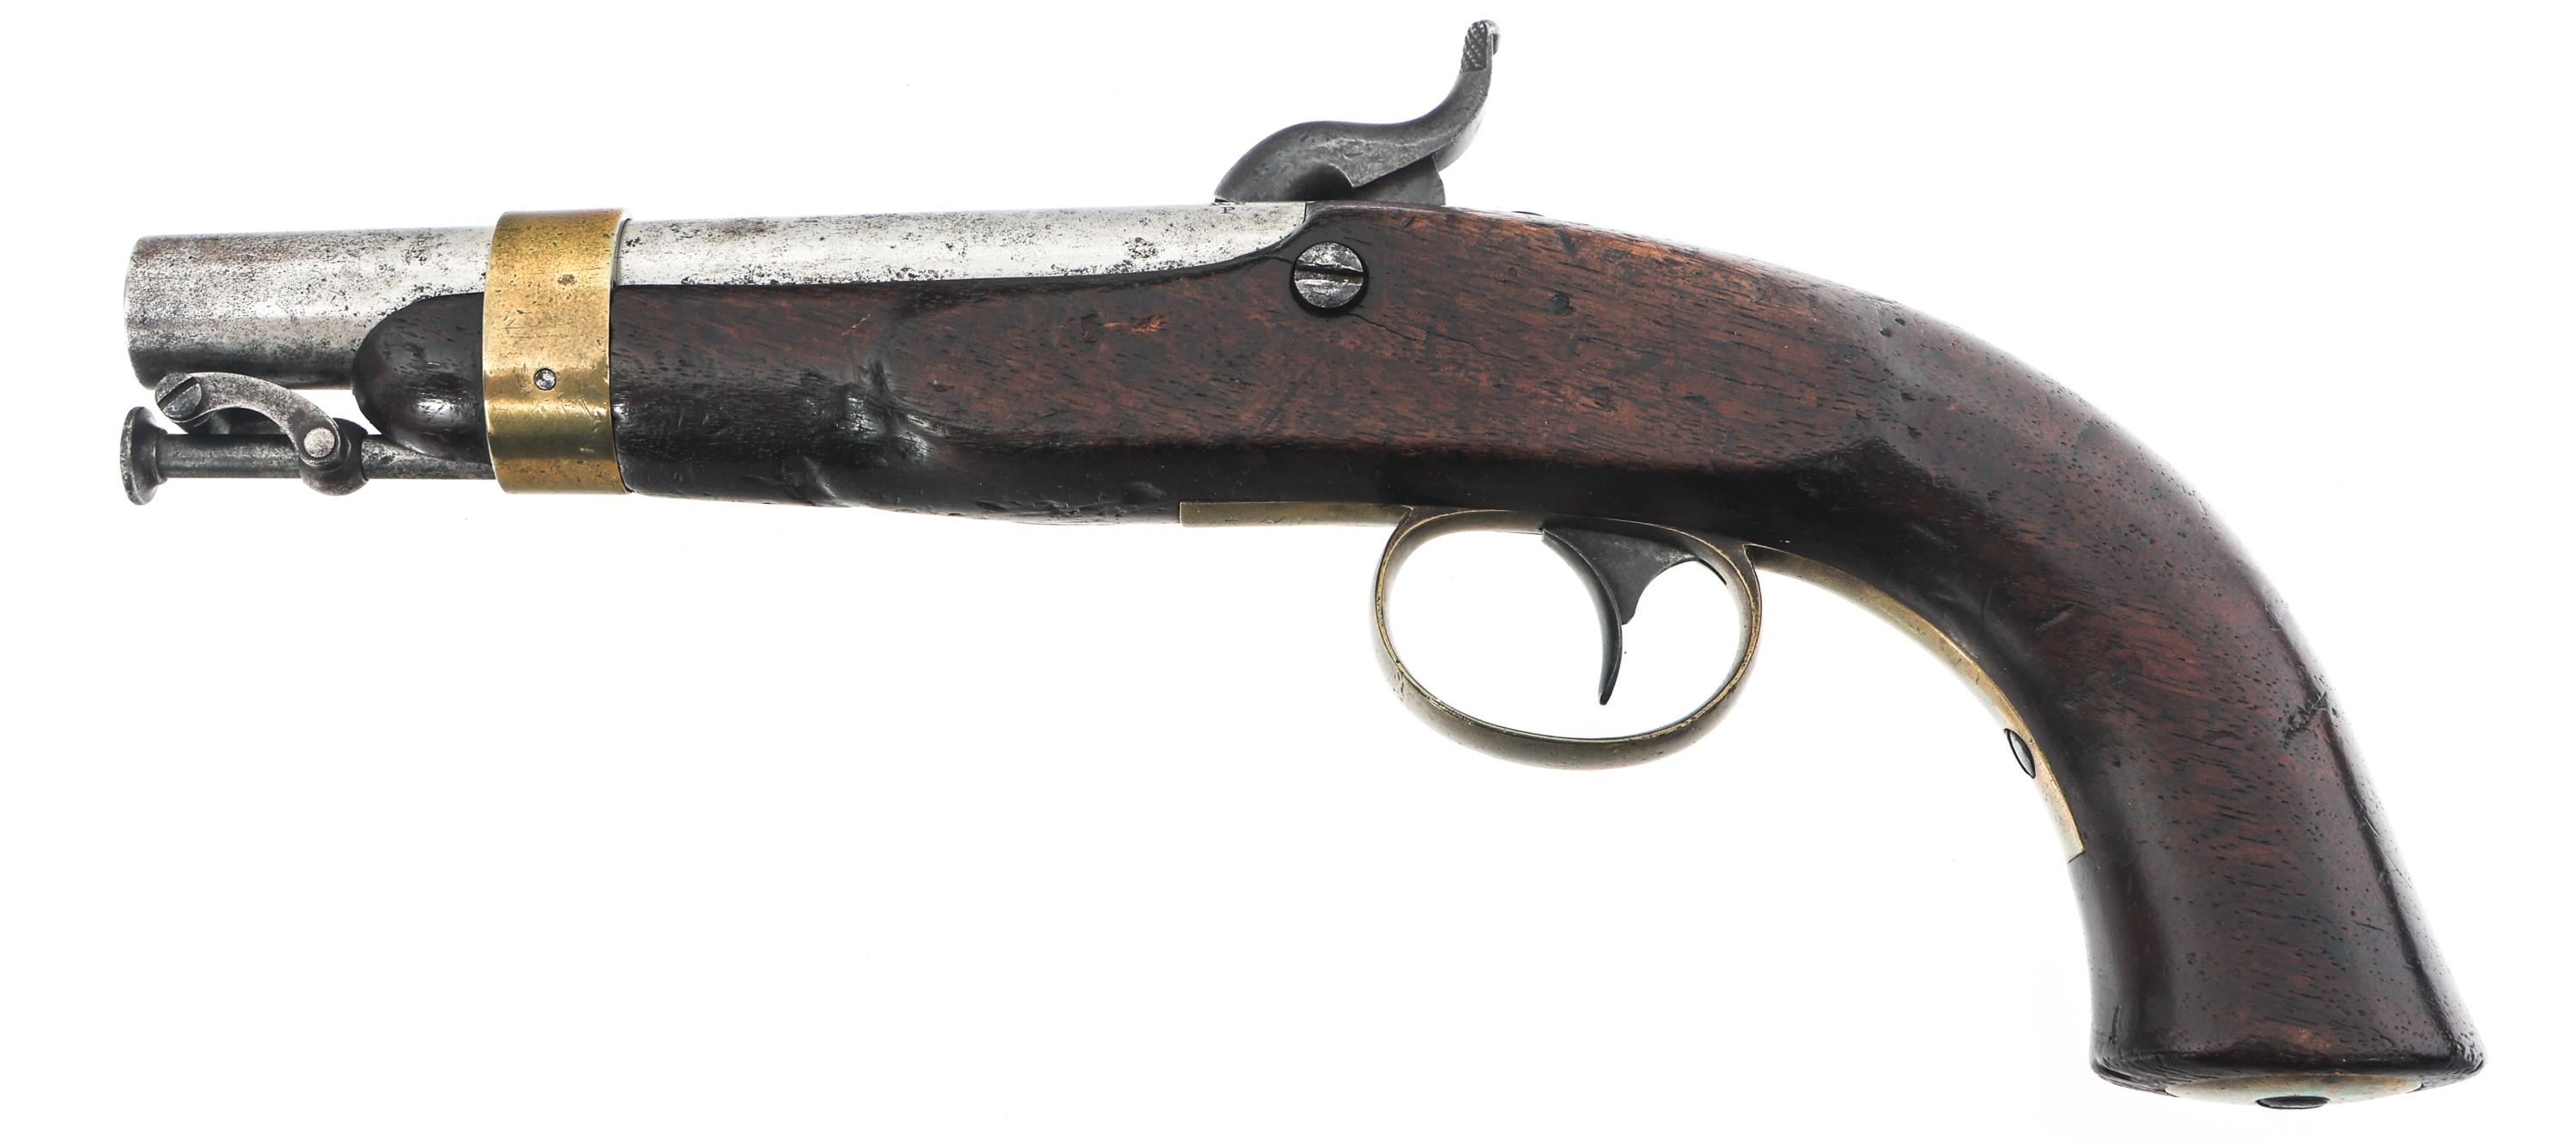 1844 N.P. AMES 1842 .54 CAL NAVY PERCUSSION PISTOL